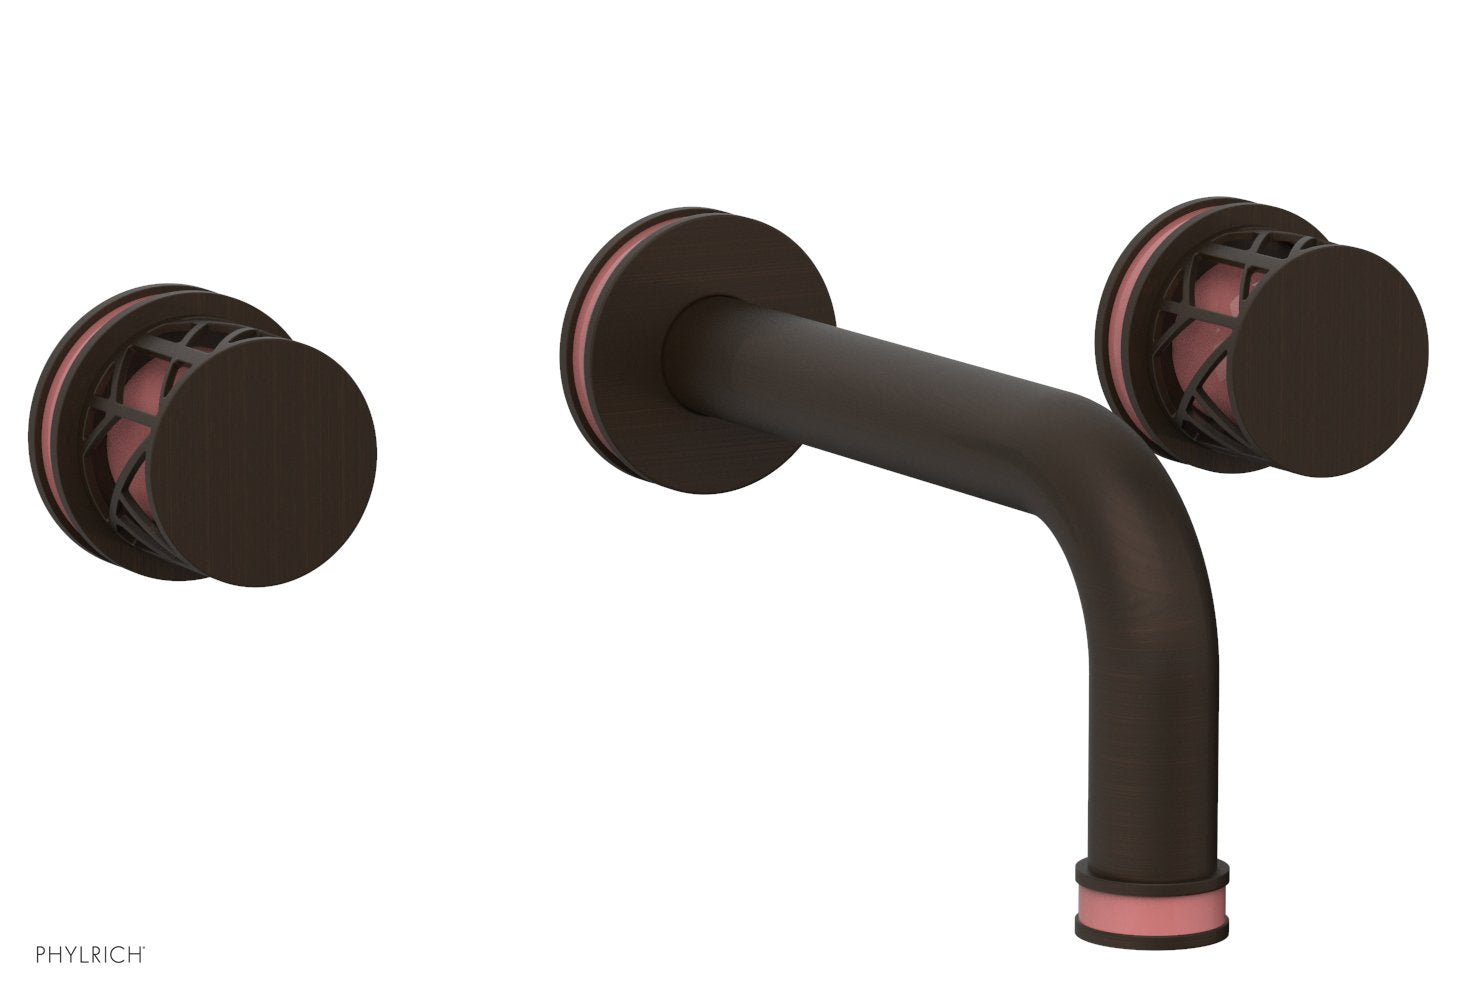 Phylrich JOLIE Wall Lavatory Set - Round Handles with "Pink" Accents